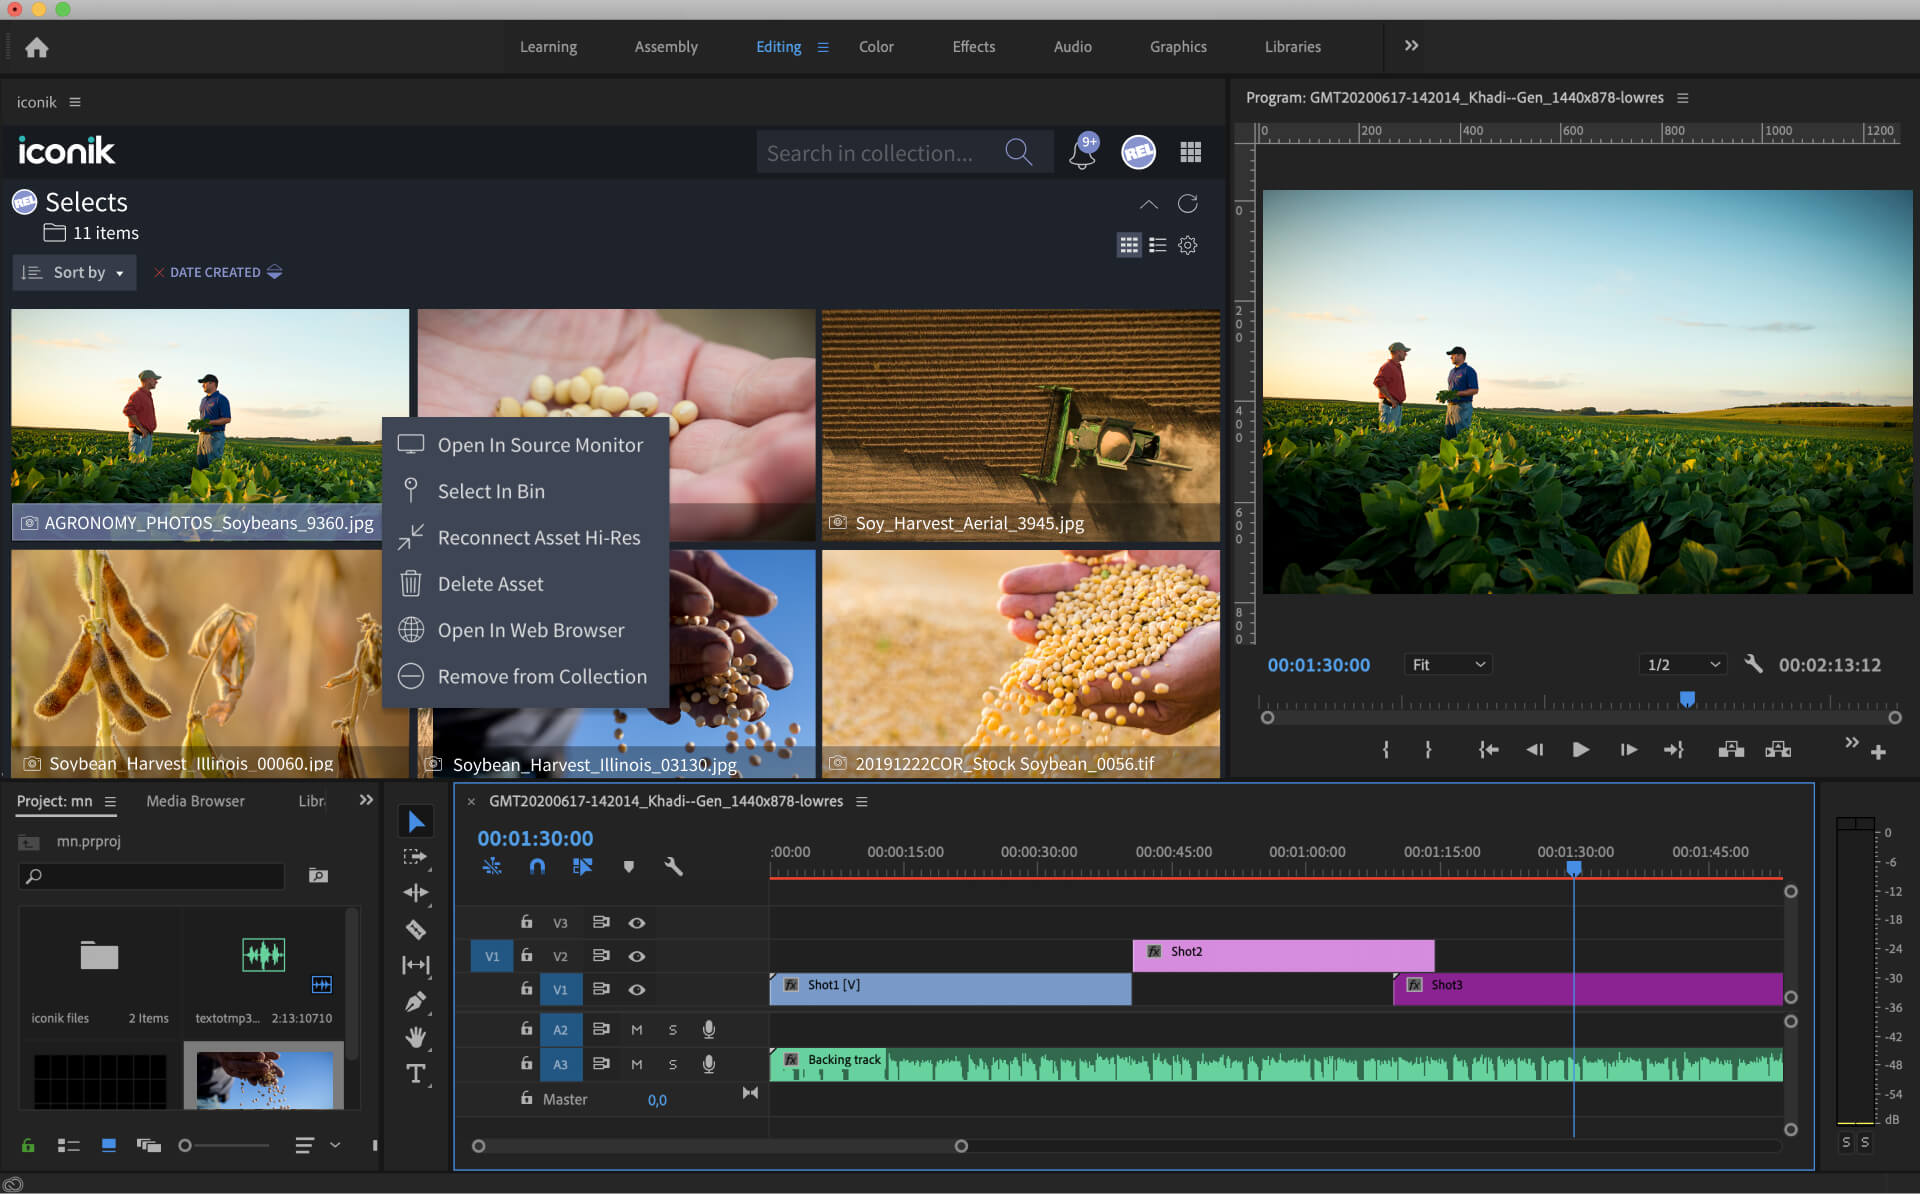 Remote video editing in Adobe Premiere Pro with the iconik panel